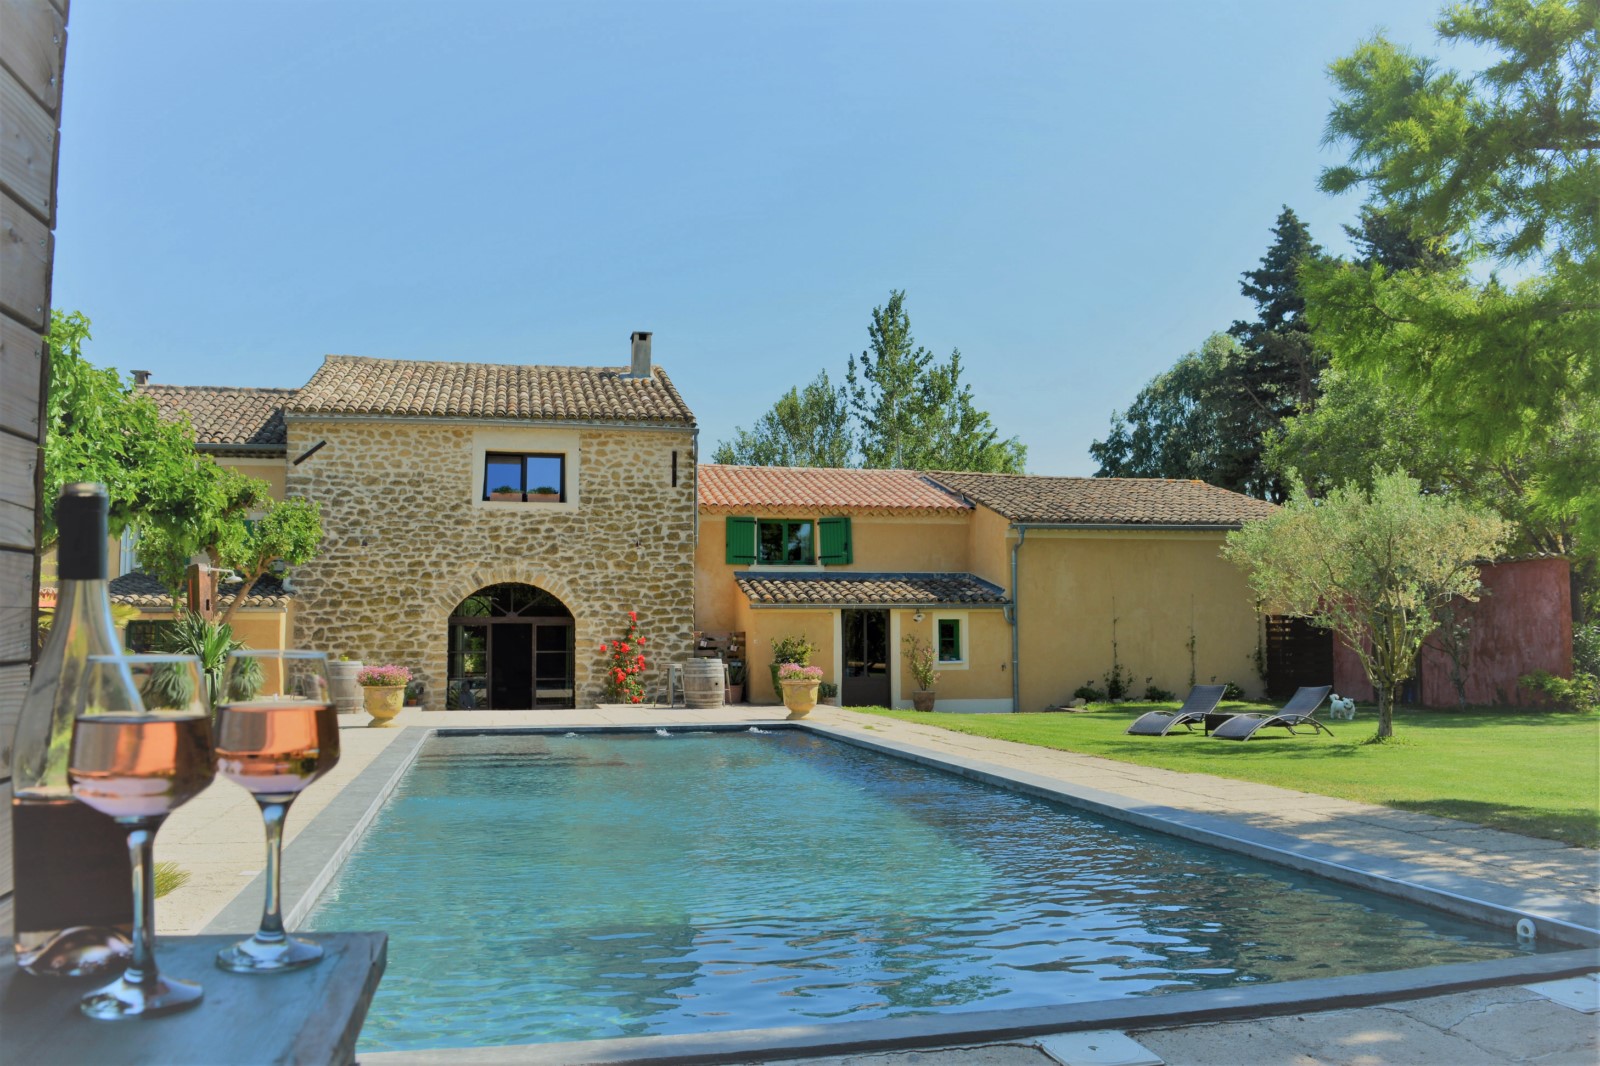 In the area of the Mont Ventoux, beautiful XVIIIth century Provencal farmhouse with guest house